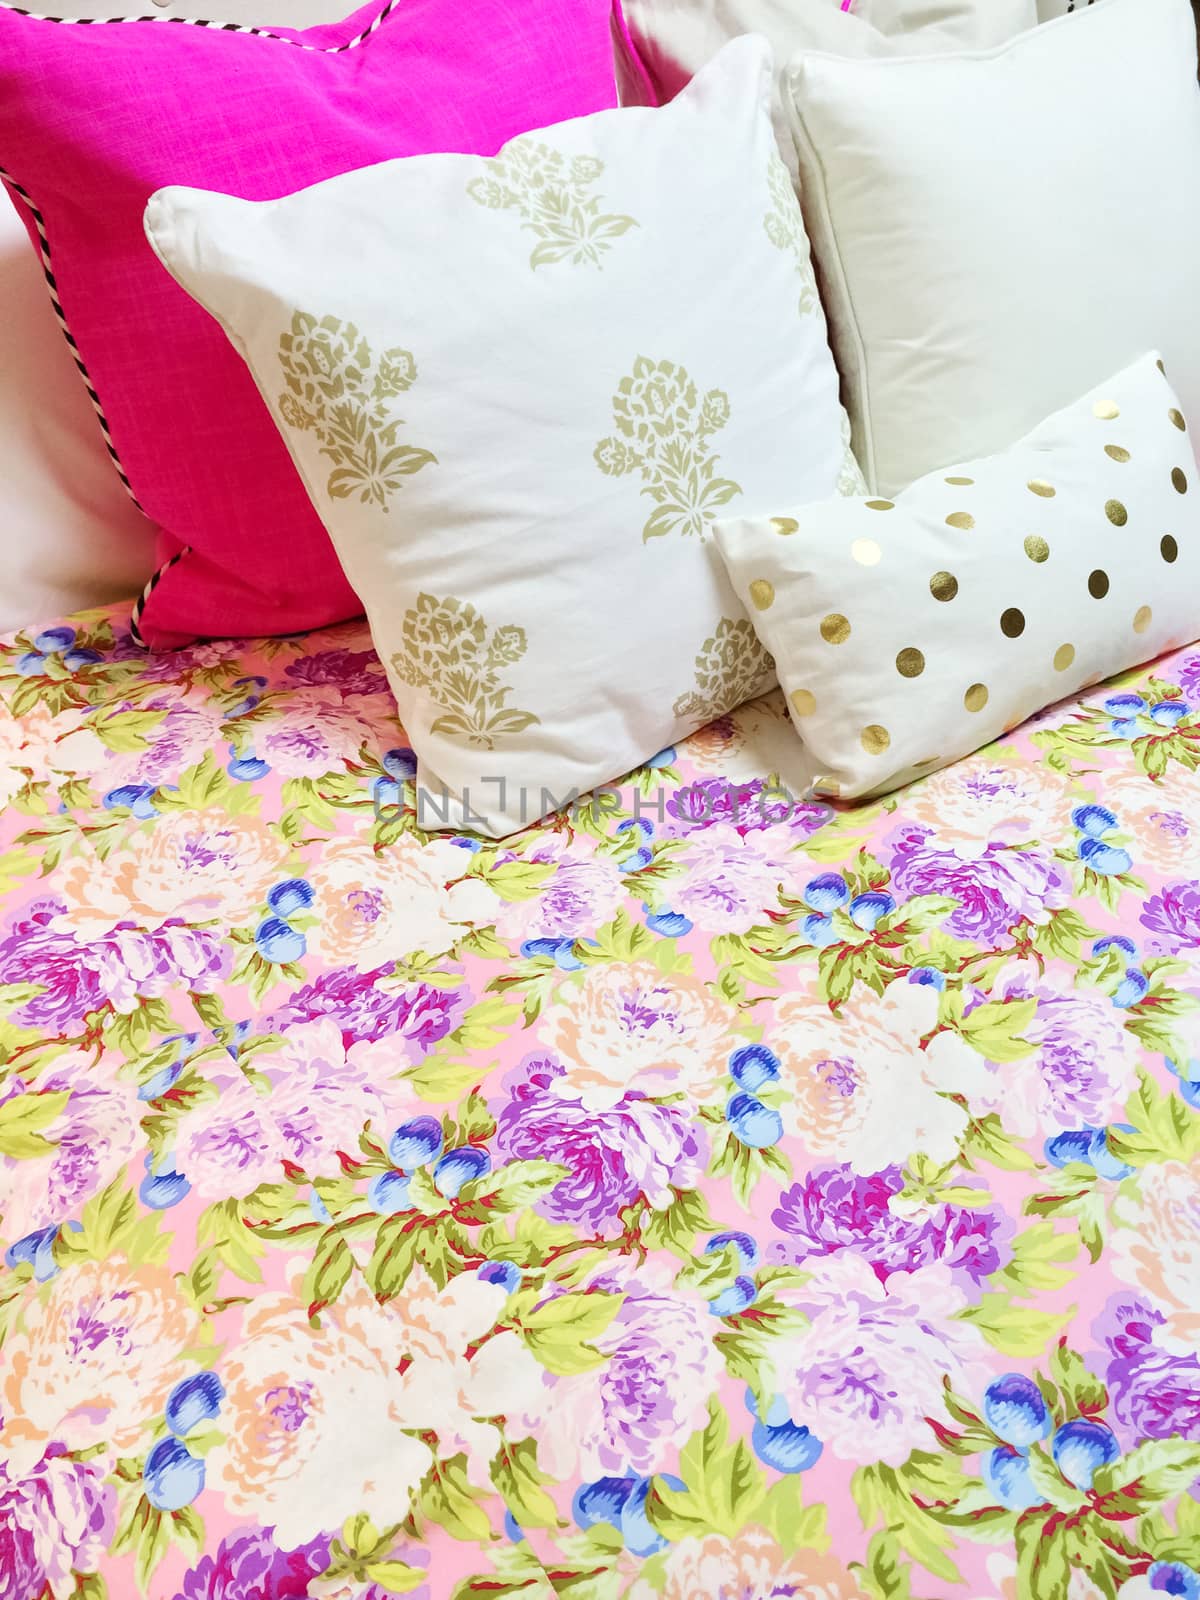 Bed with colorful floral design bedclothes by anikasalsera